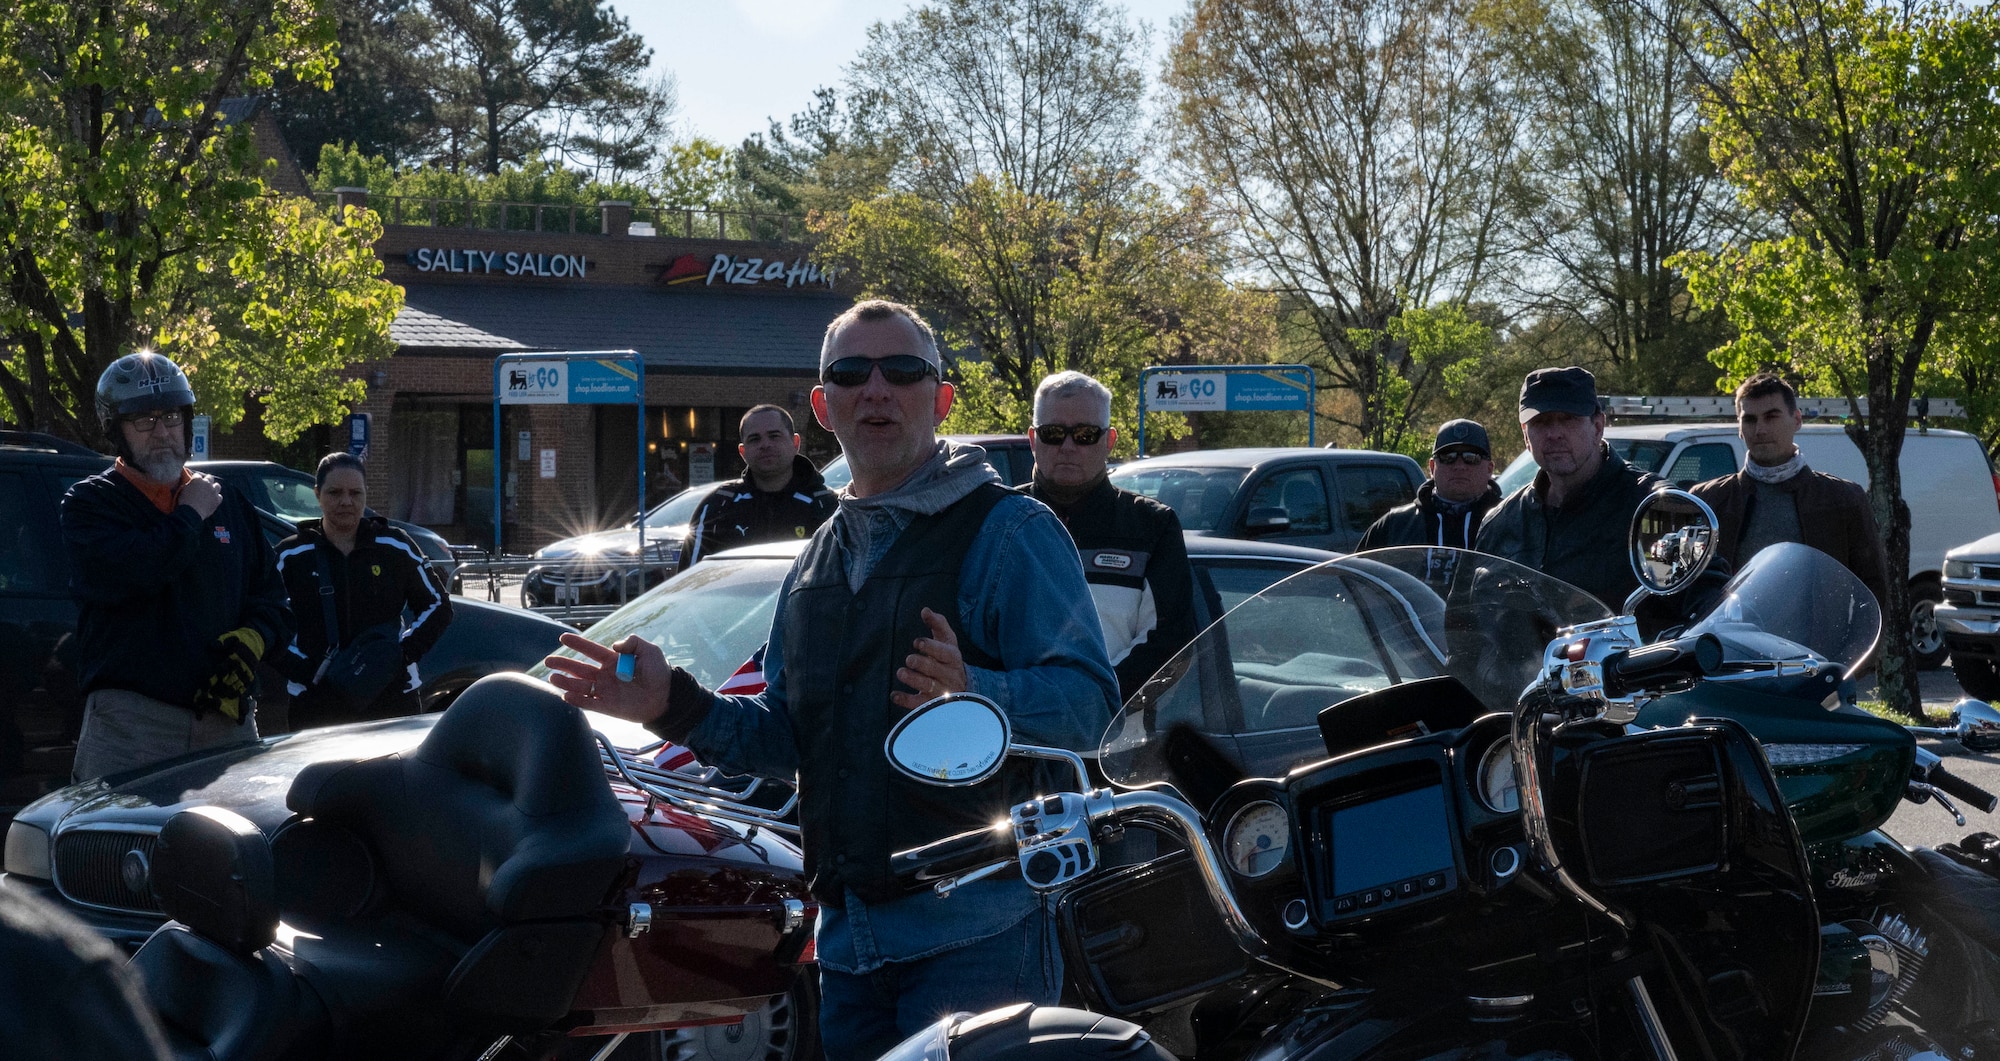 TRADOC promotes safety, camaraderie during motorcycle ride